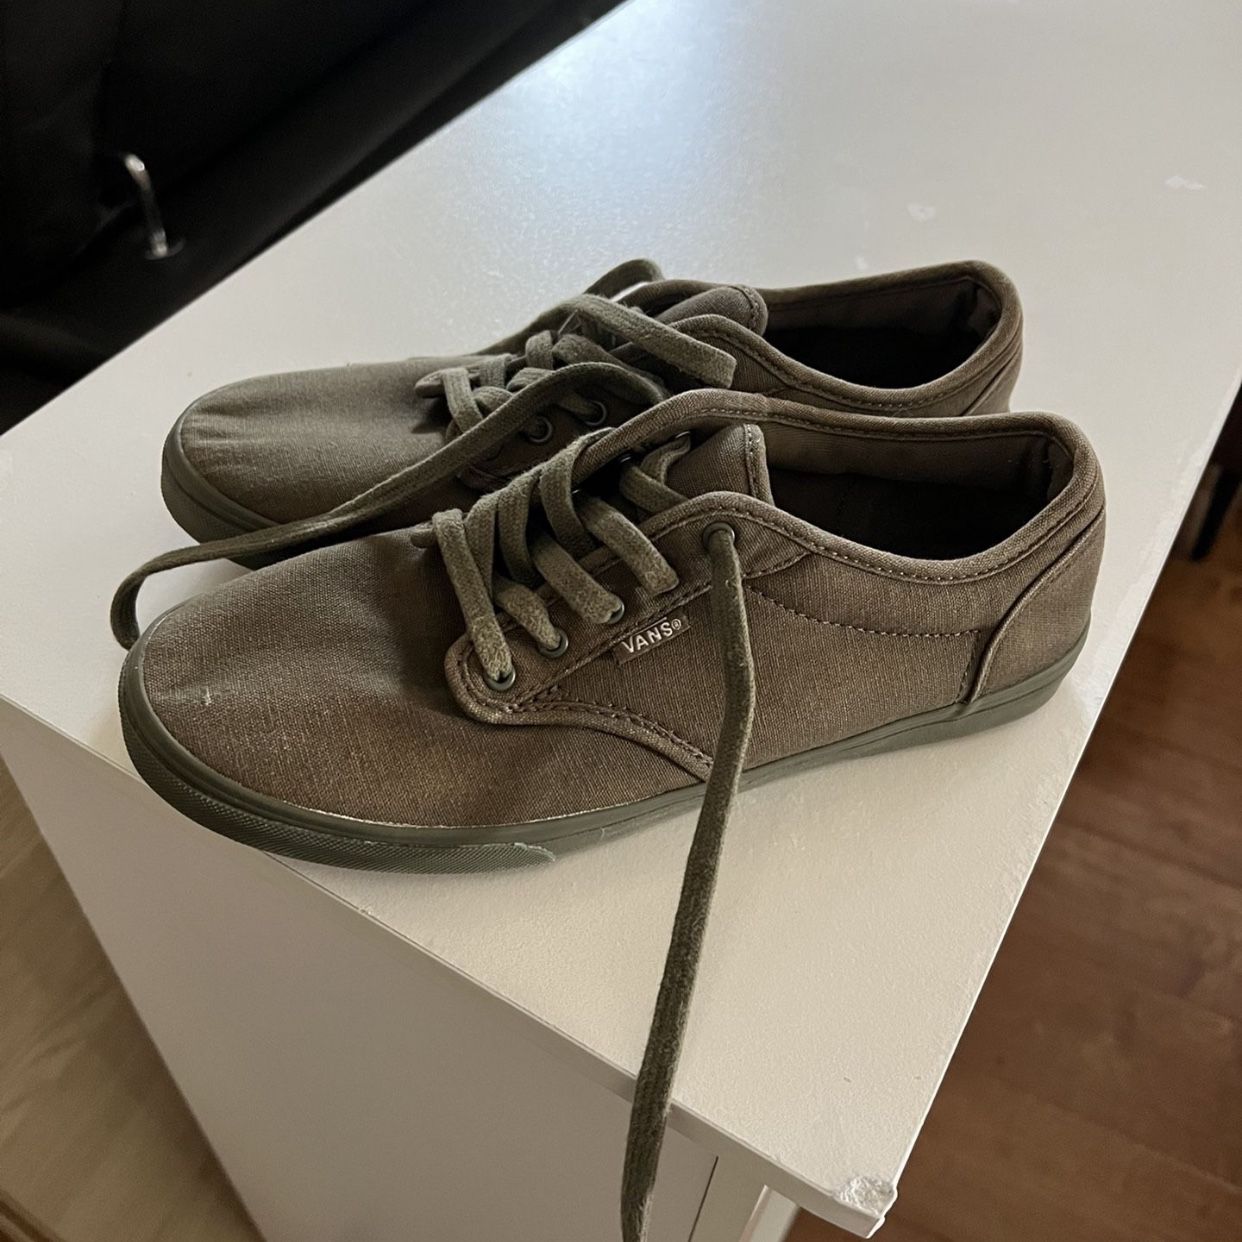 Dior Shoes for Sale in Windsor Hills, CA - OfferUp